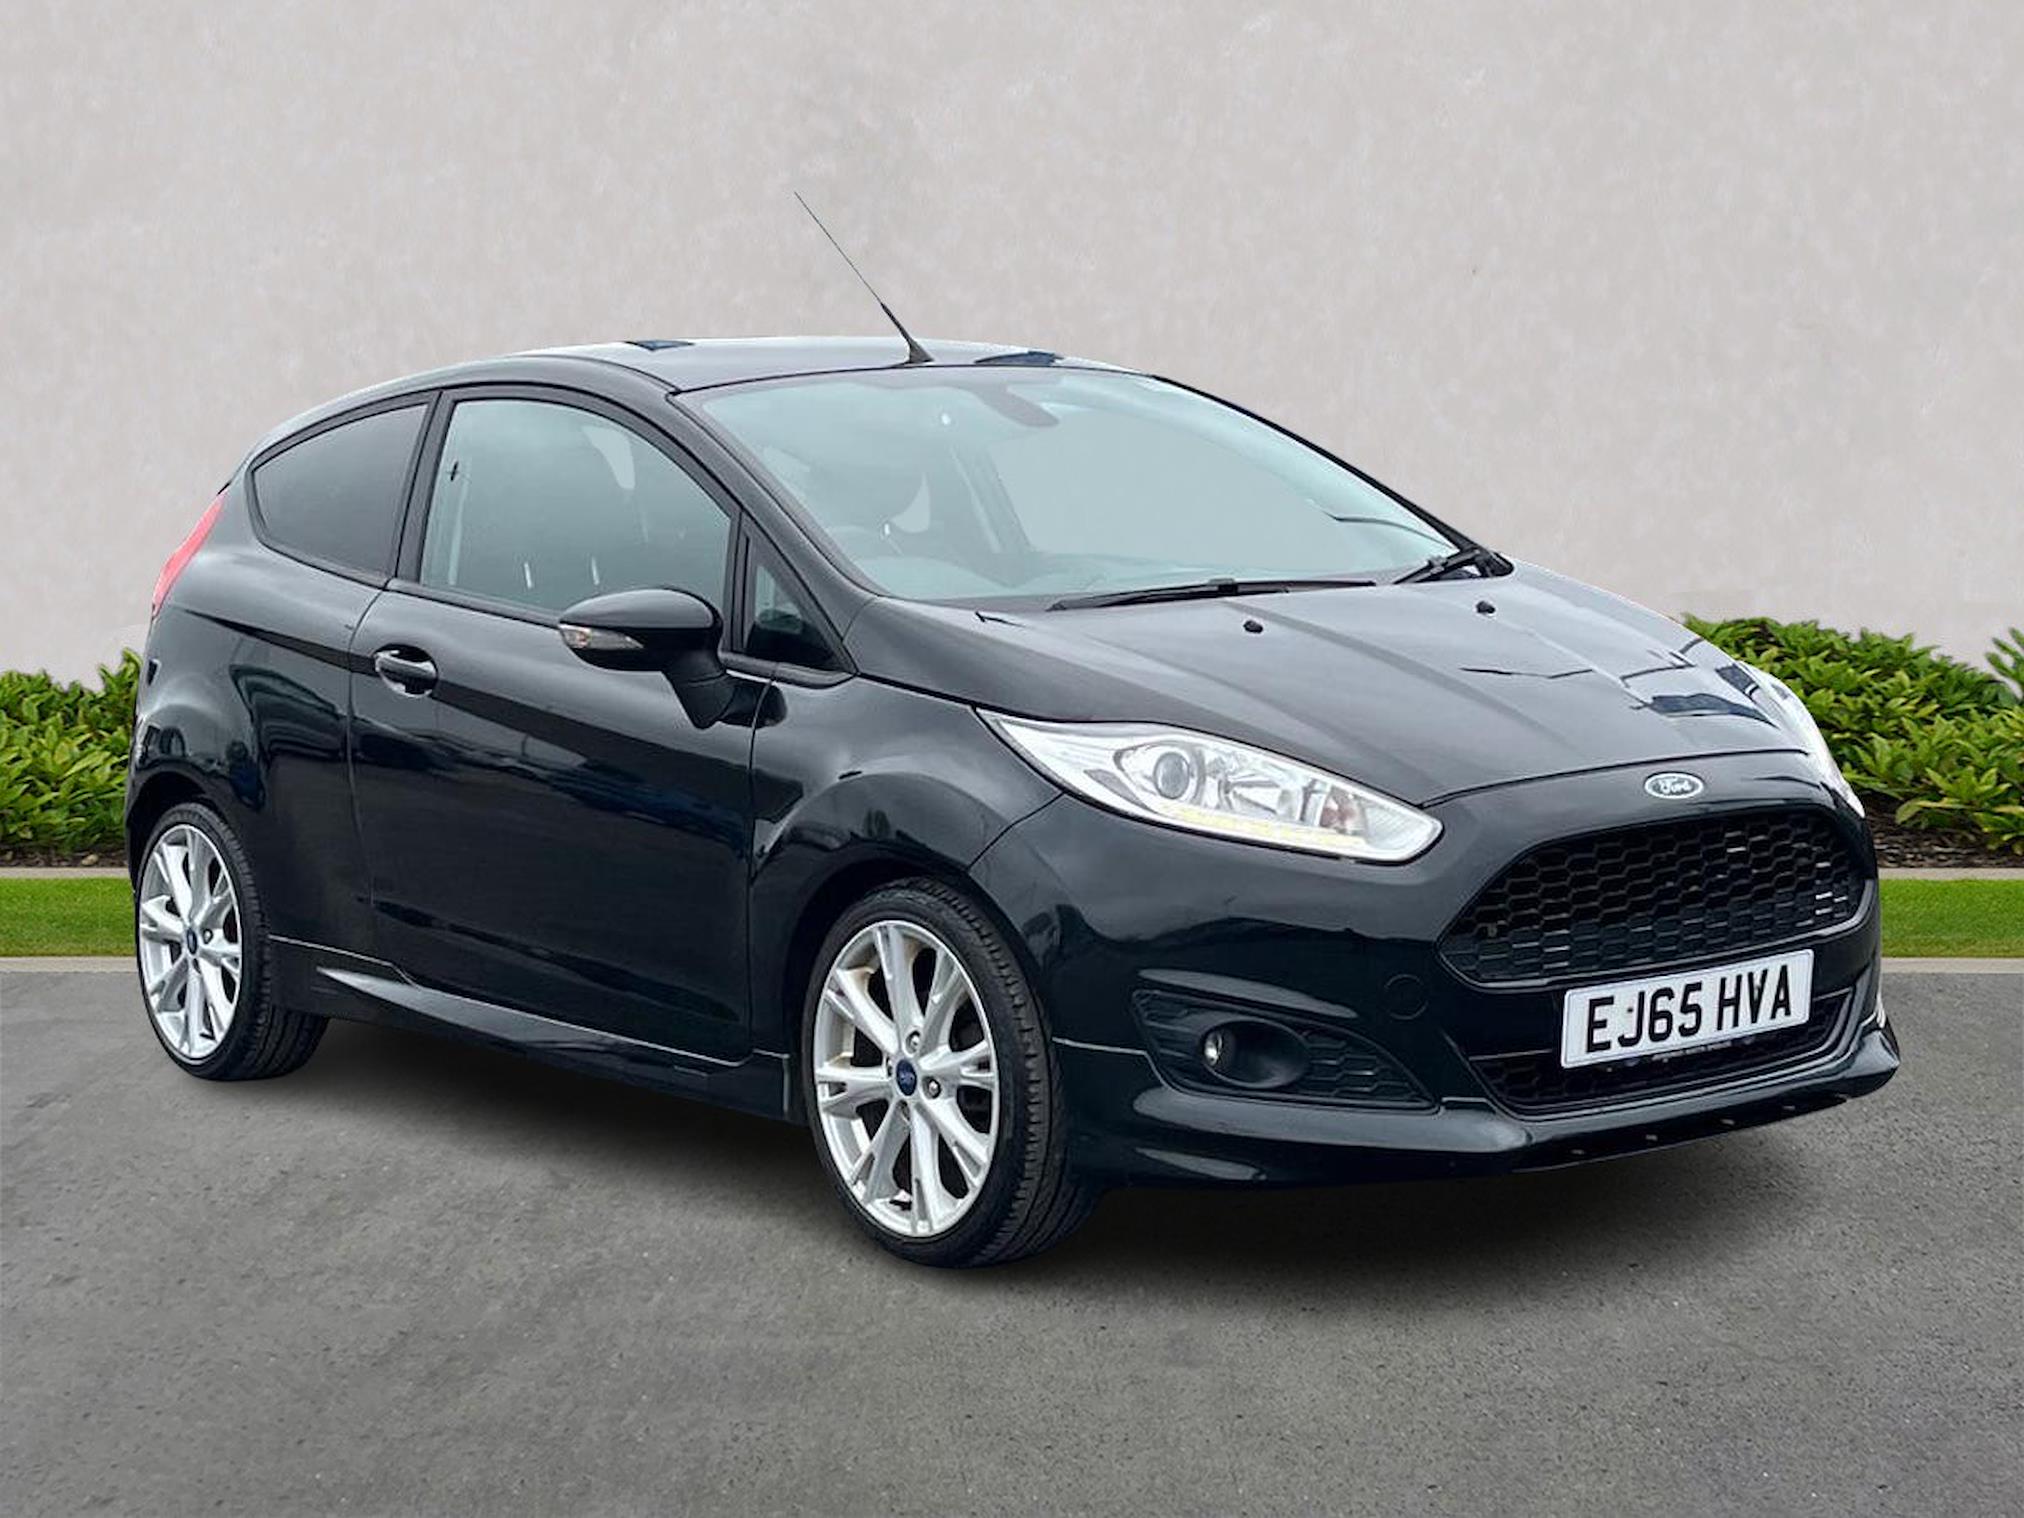 Used FORD FIESTA 1.5 Tdci Zetec S 3Dr 2015